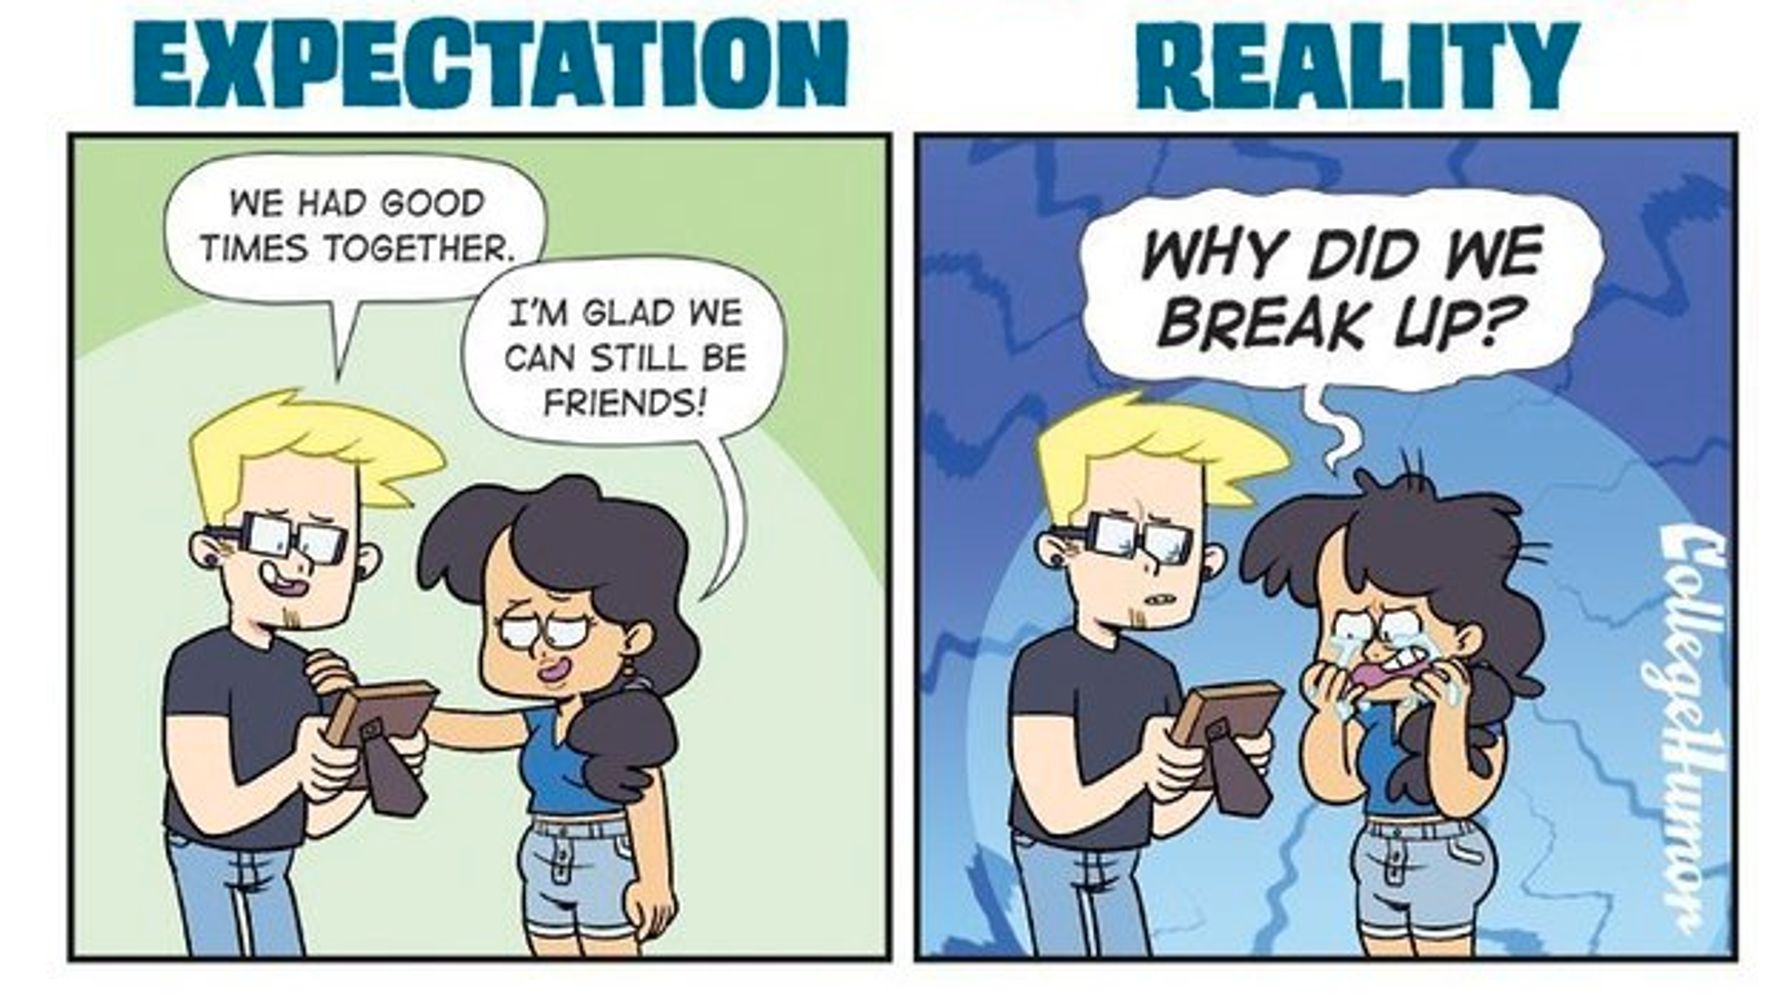 Meeting your internet friend : r/ExpectationVsReality